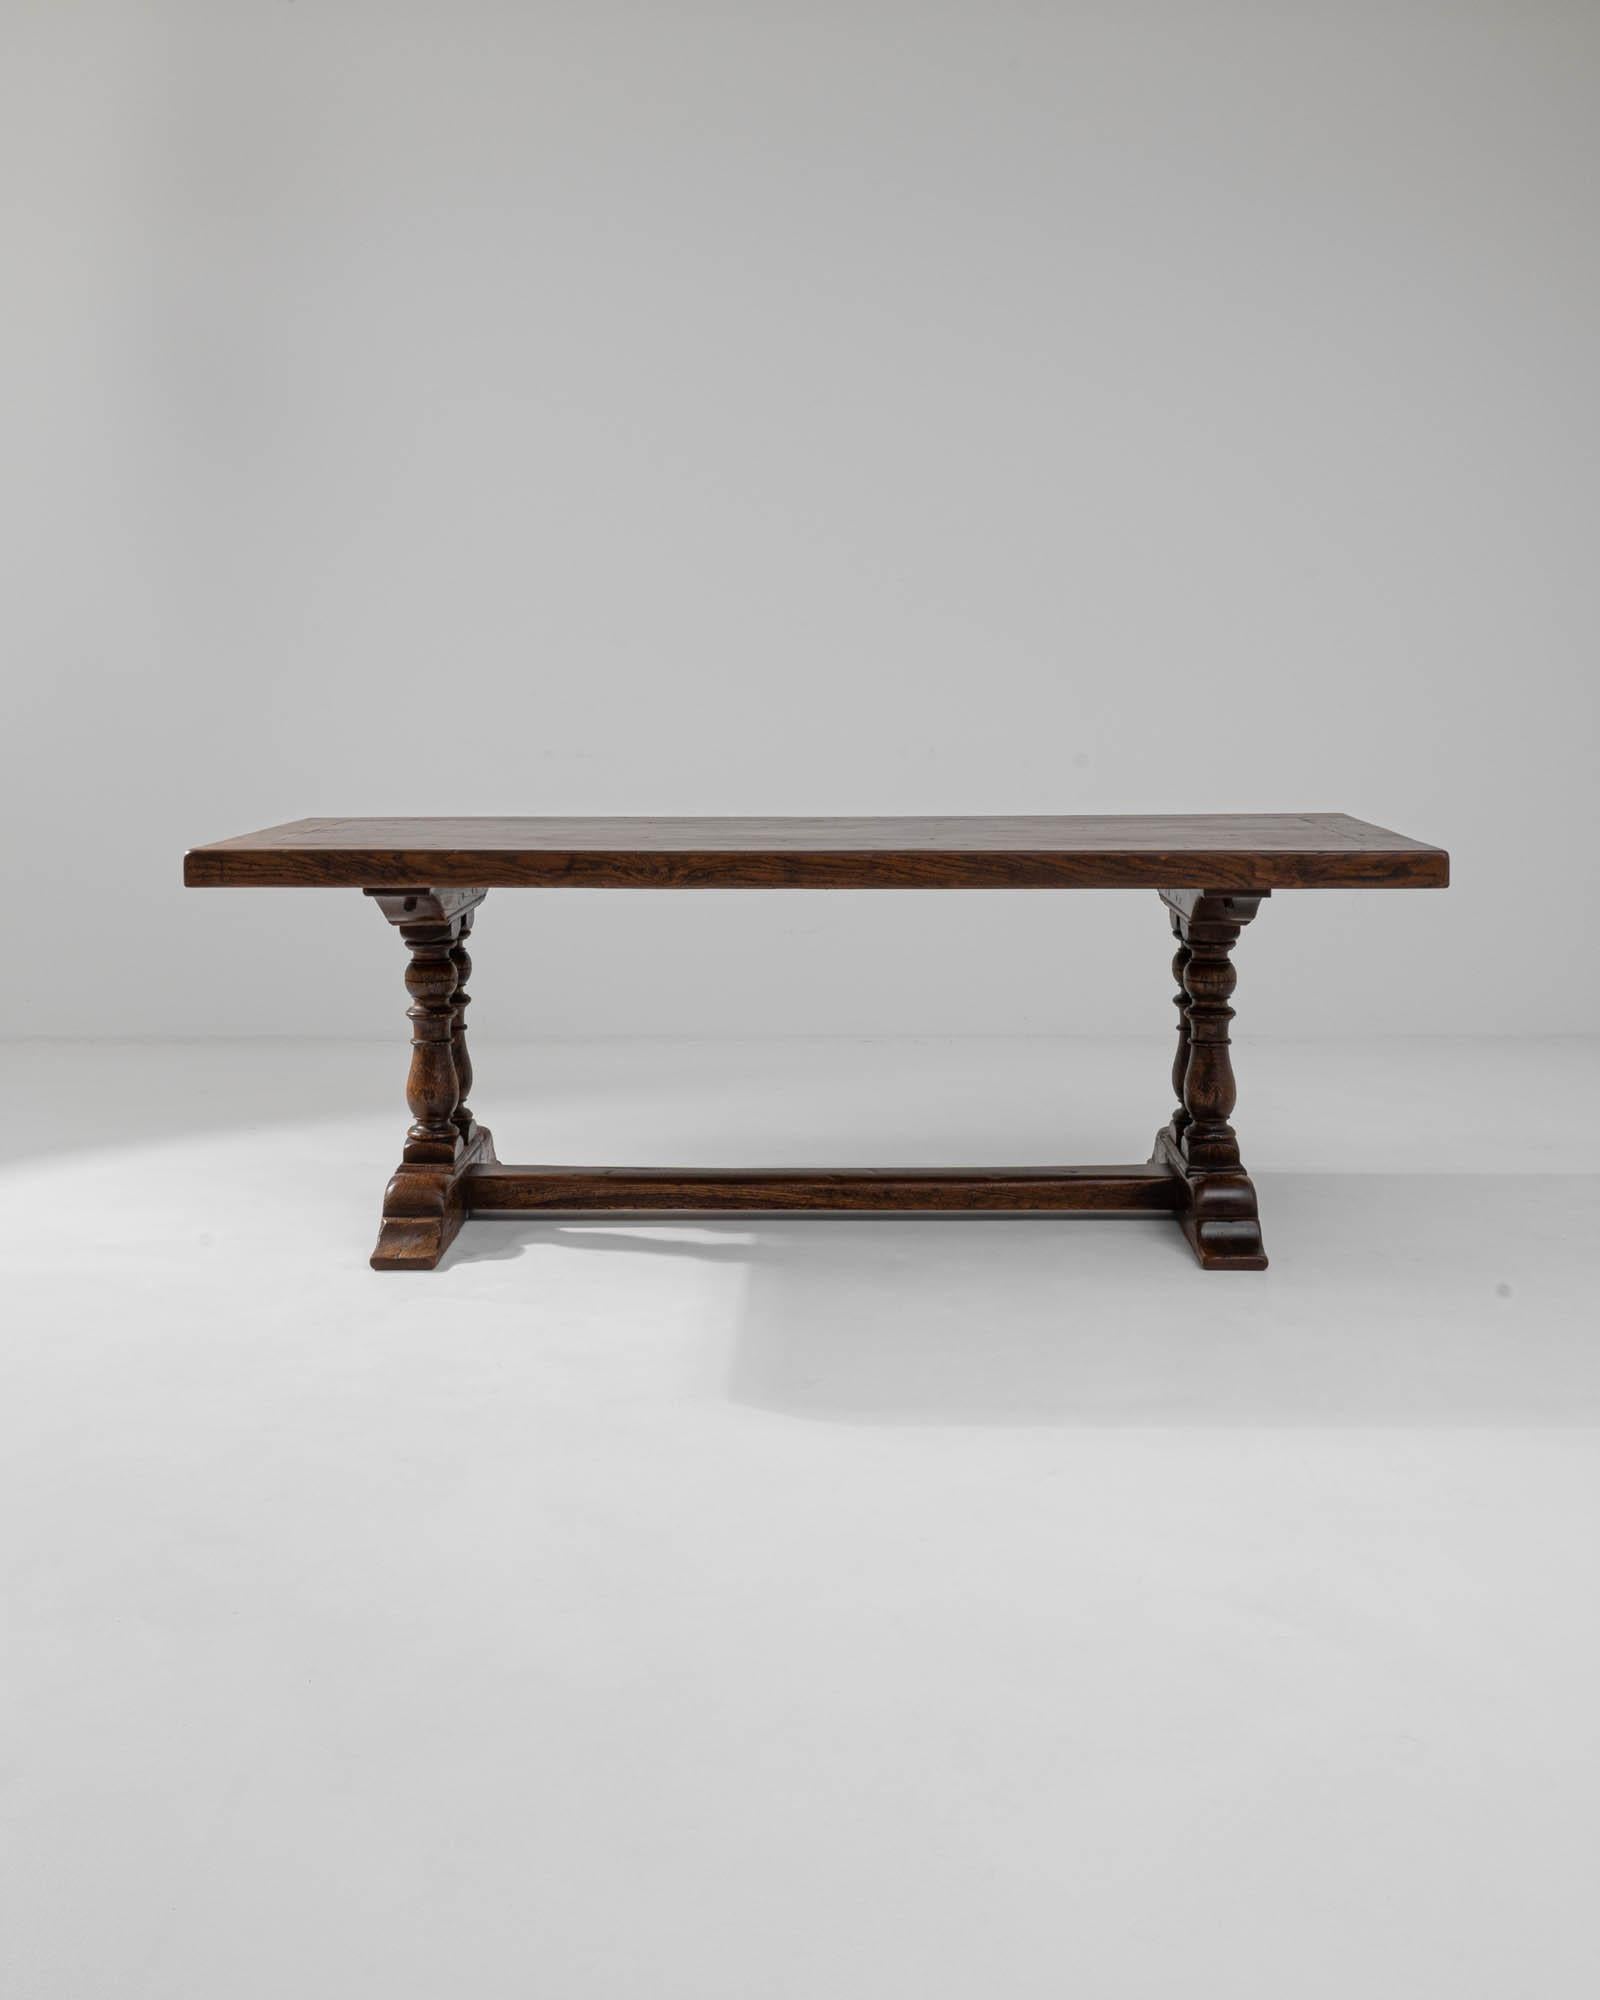 A wooden dining table made in 20th century Belgium. Two sets of lavishly legs support each end of this ornate table, connected by a long stretcher in a trestle fashion. The gleaming, rich oak shines with remarkable luster. Exuding an elegant, yet